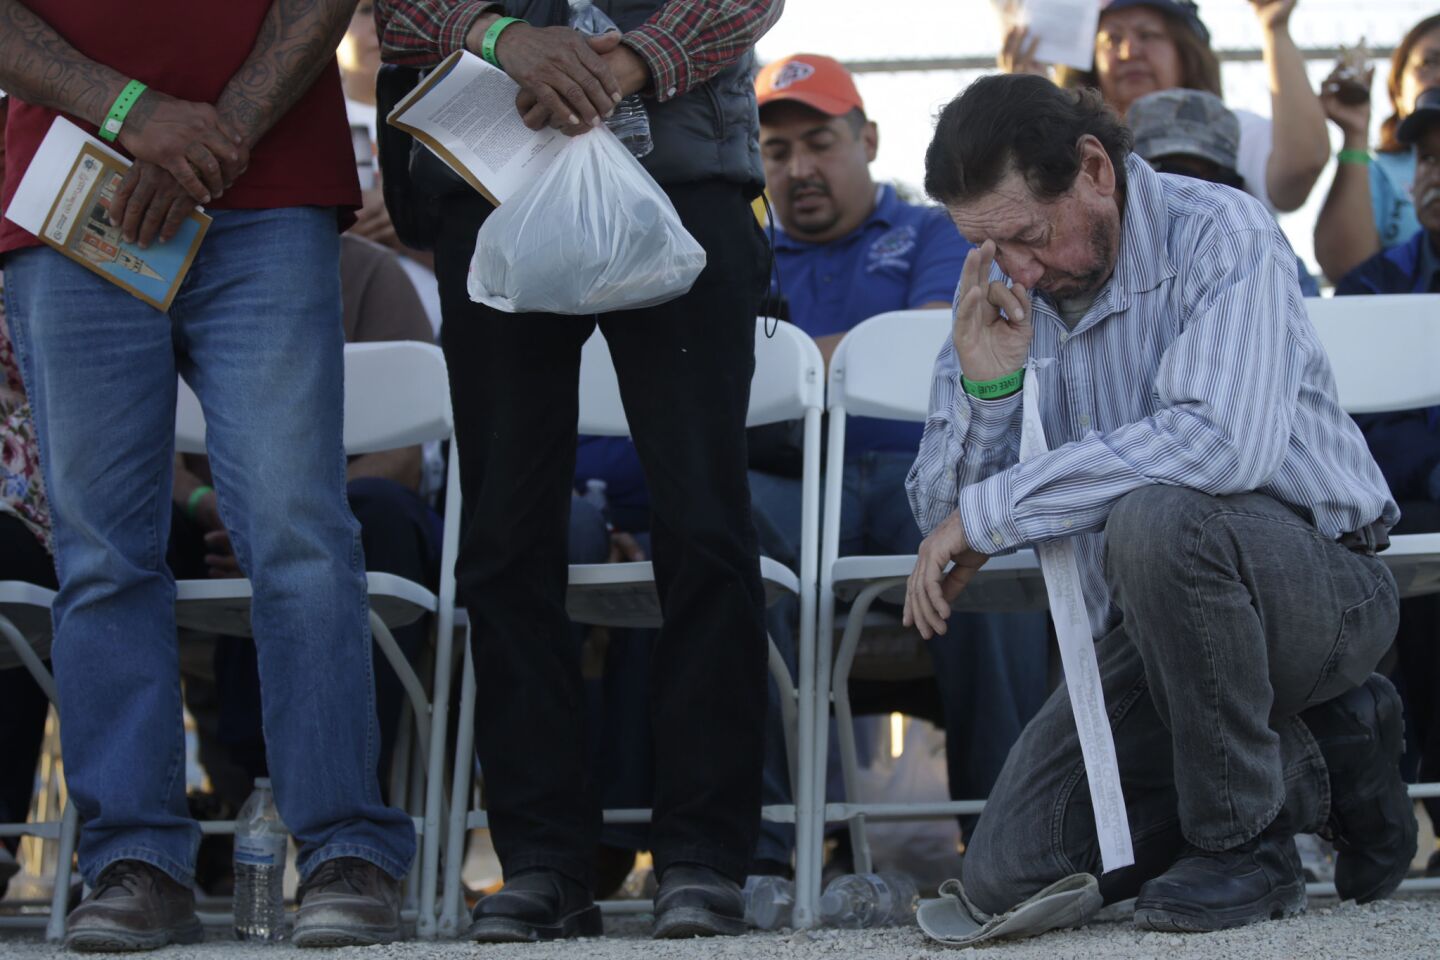 Bert Dunn of El Paso, Texas, prays on the U.S. side of the border with Mexico near Ciudad Juarez, Mexico, on Wednesday as Pope Francis celebrates Mass.